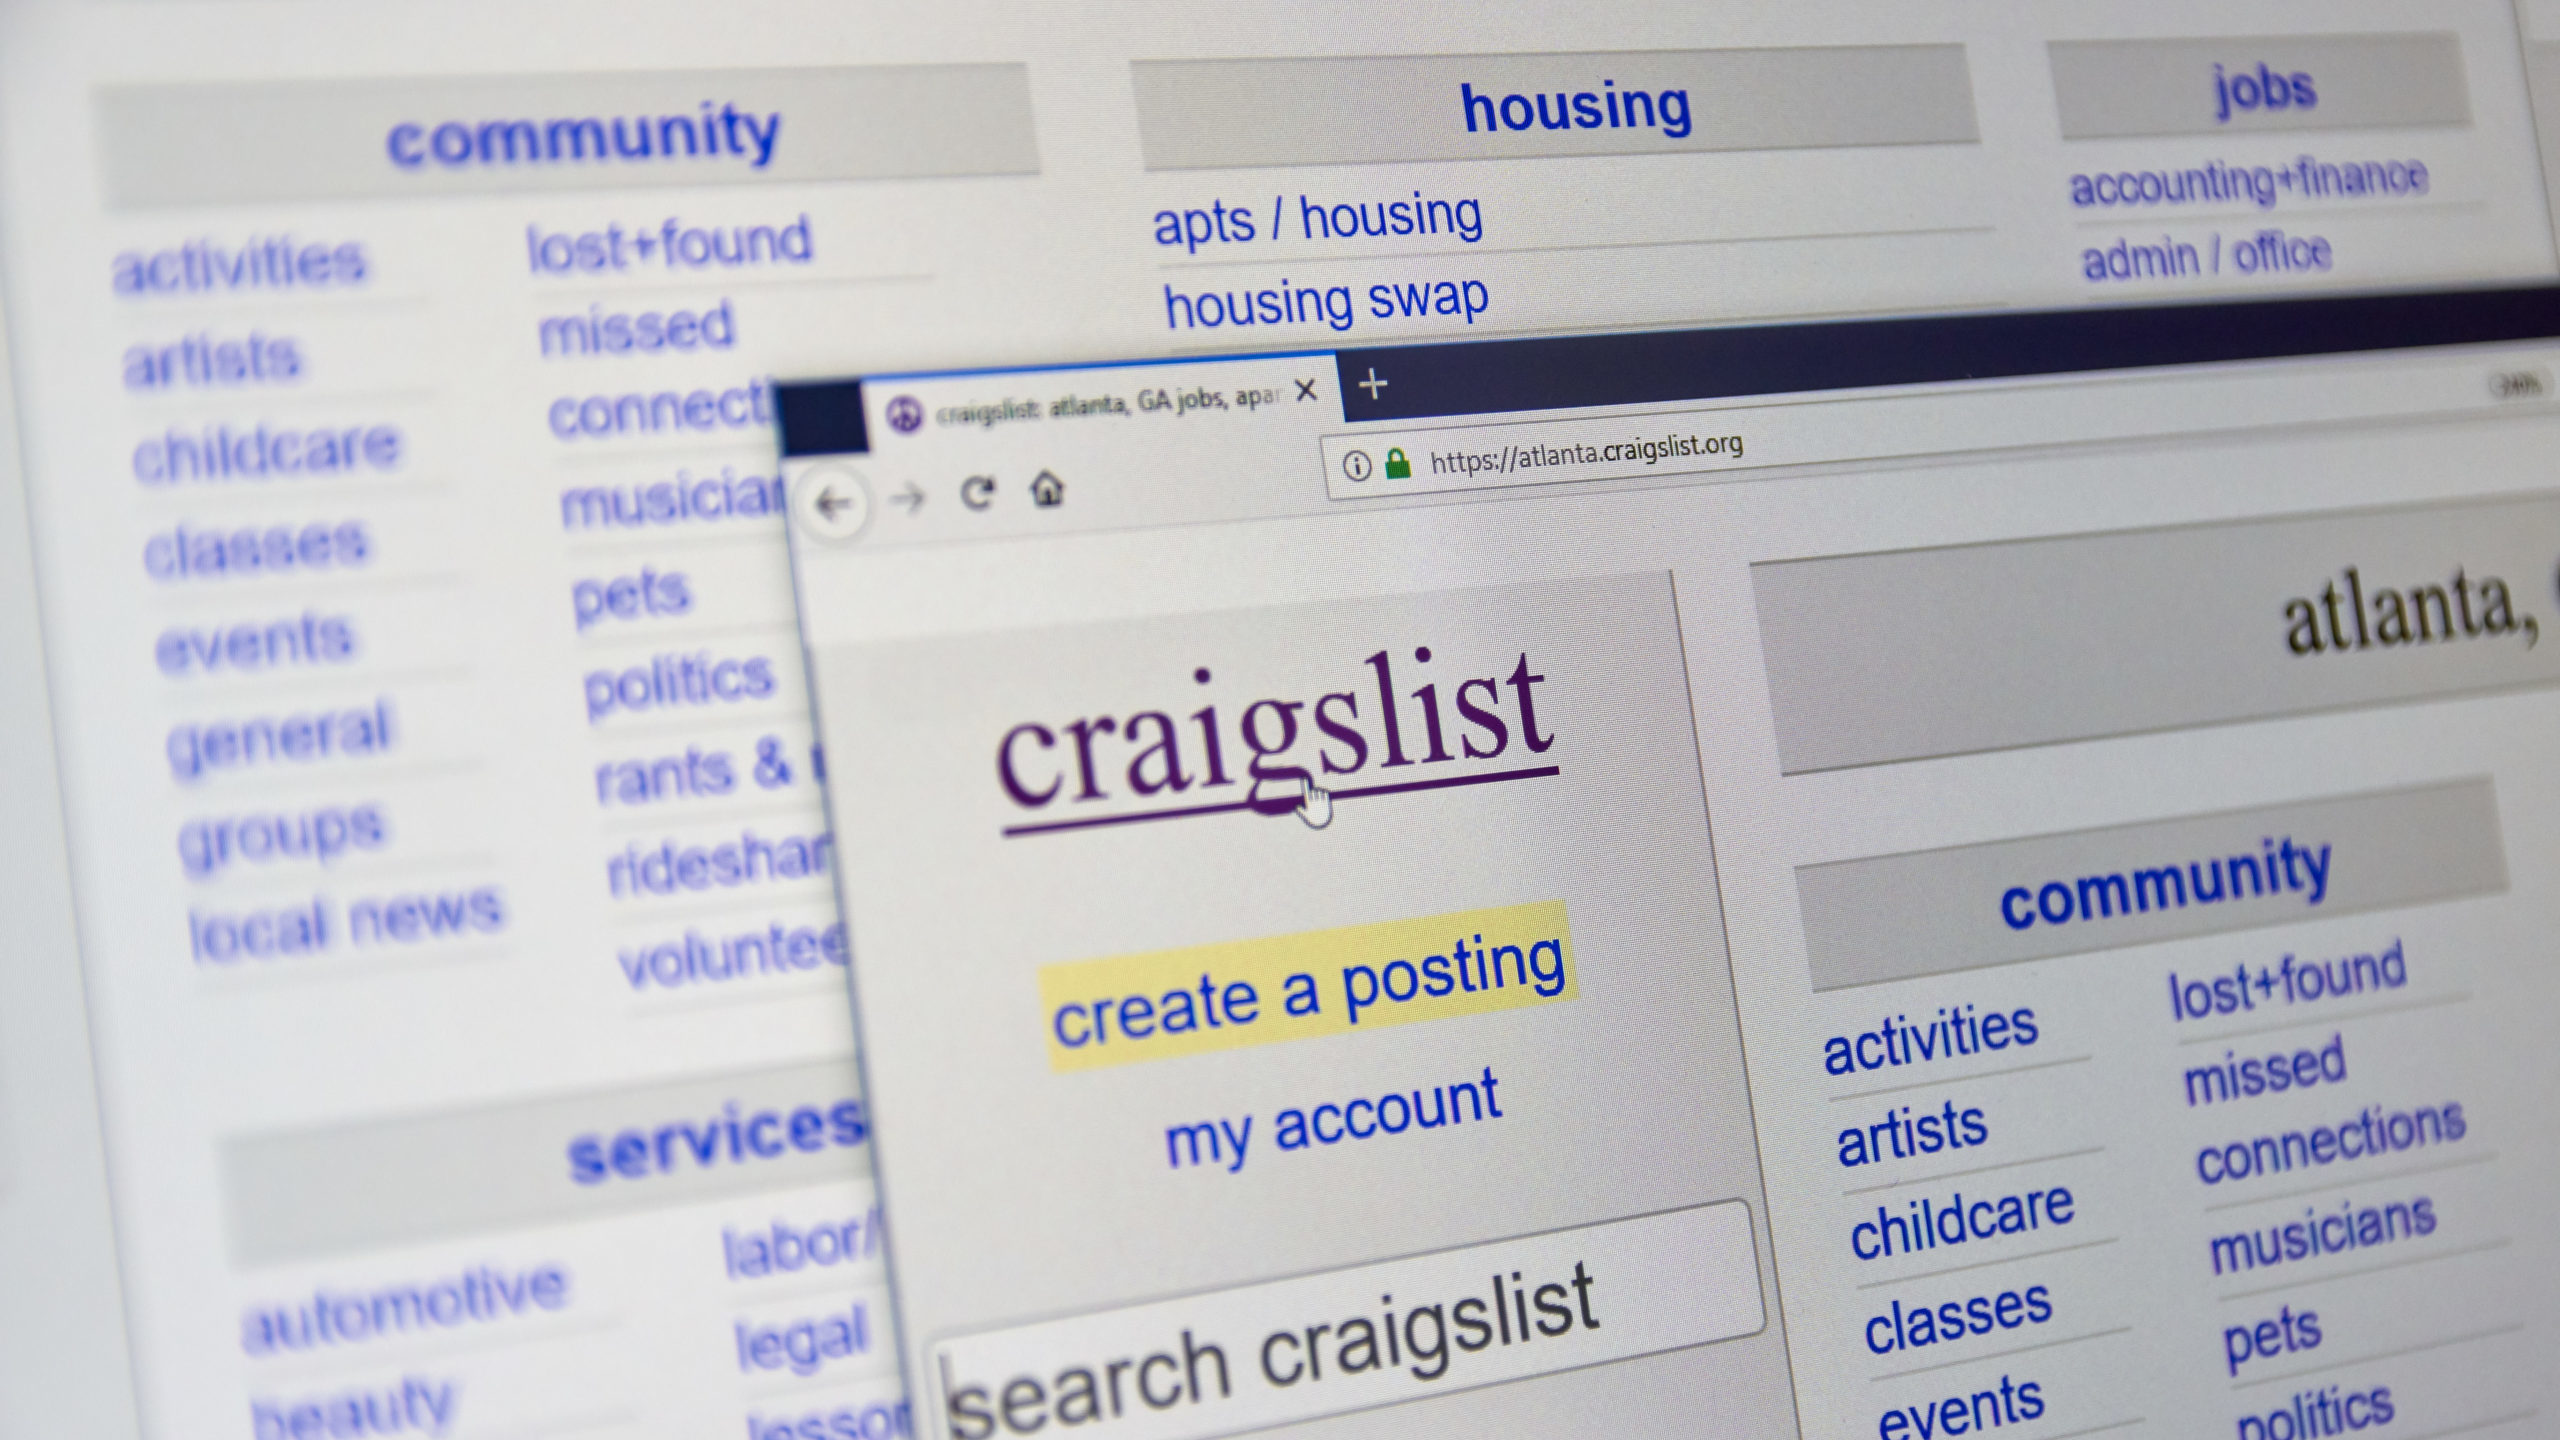 BizGuide - How to create a job post on Craigslist